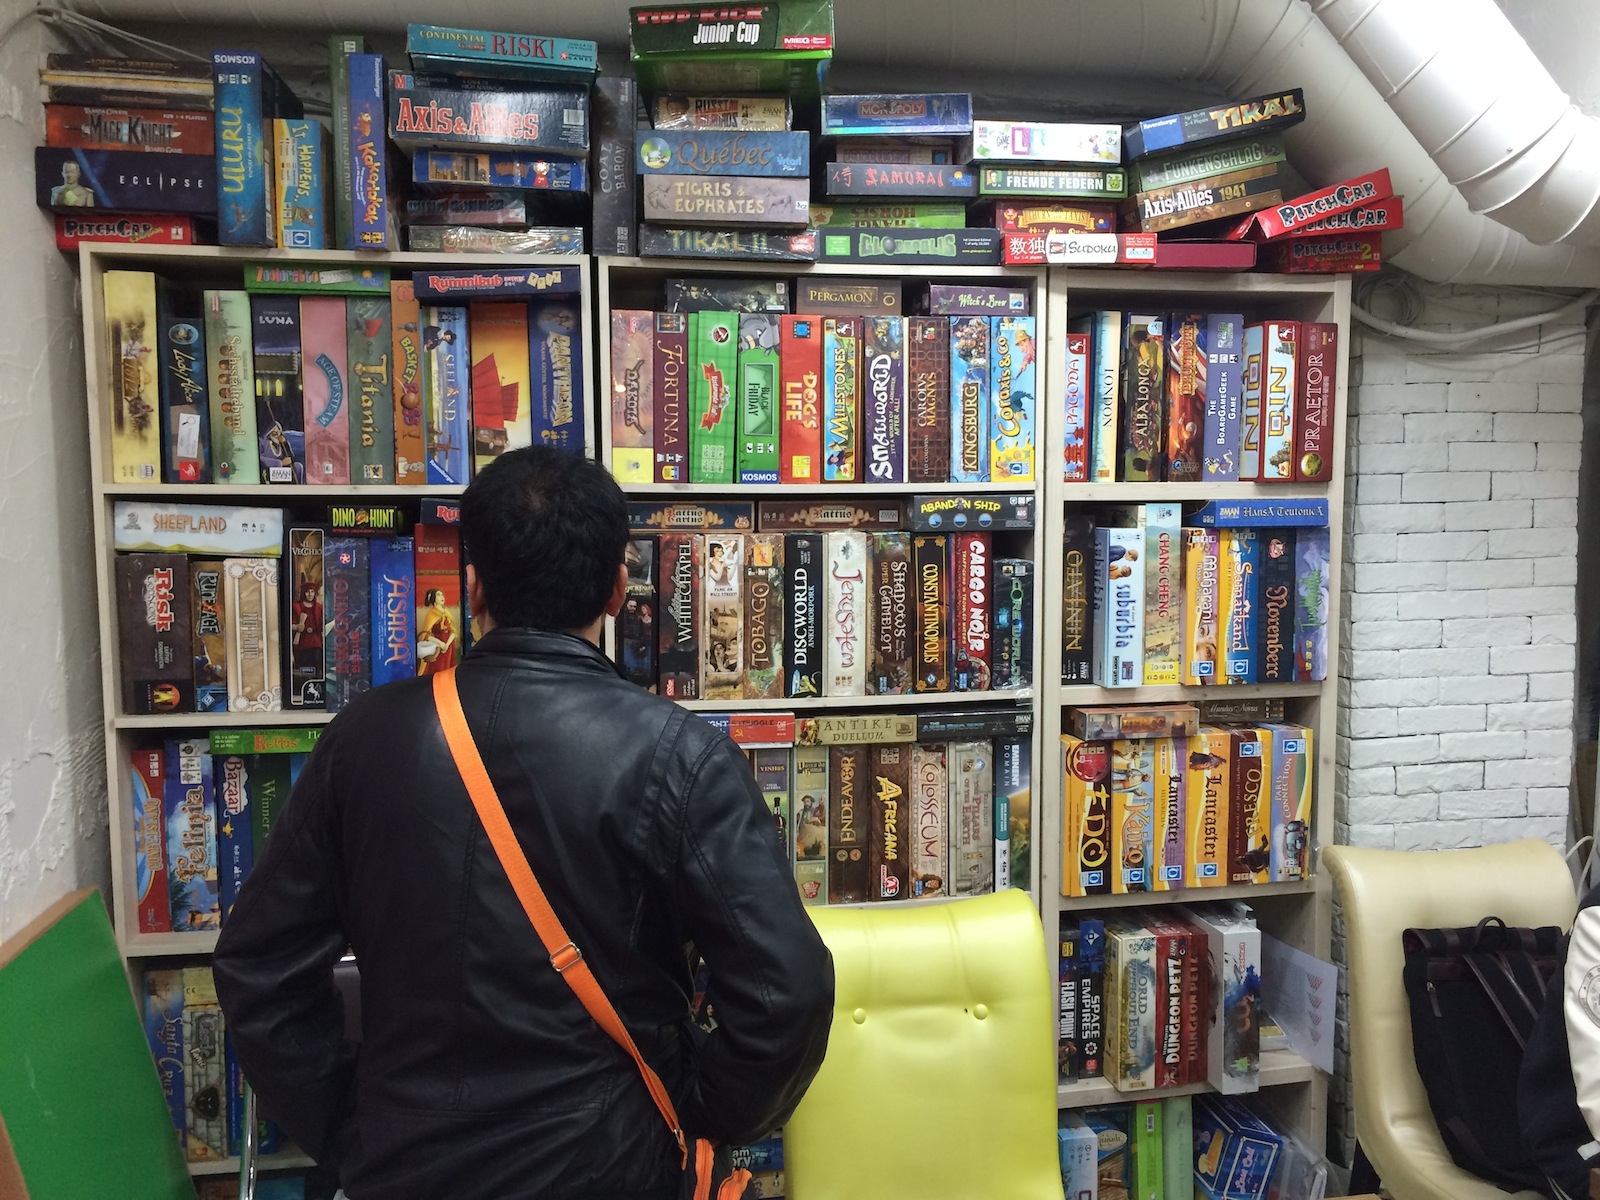 Poy checking out boardgames